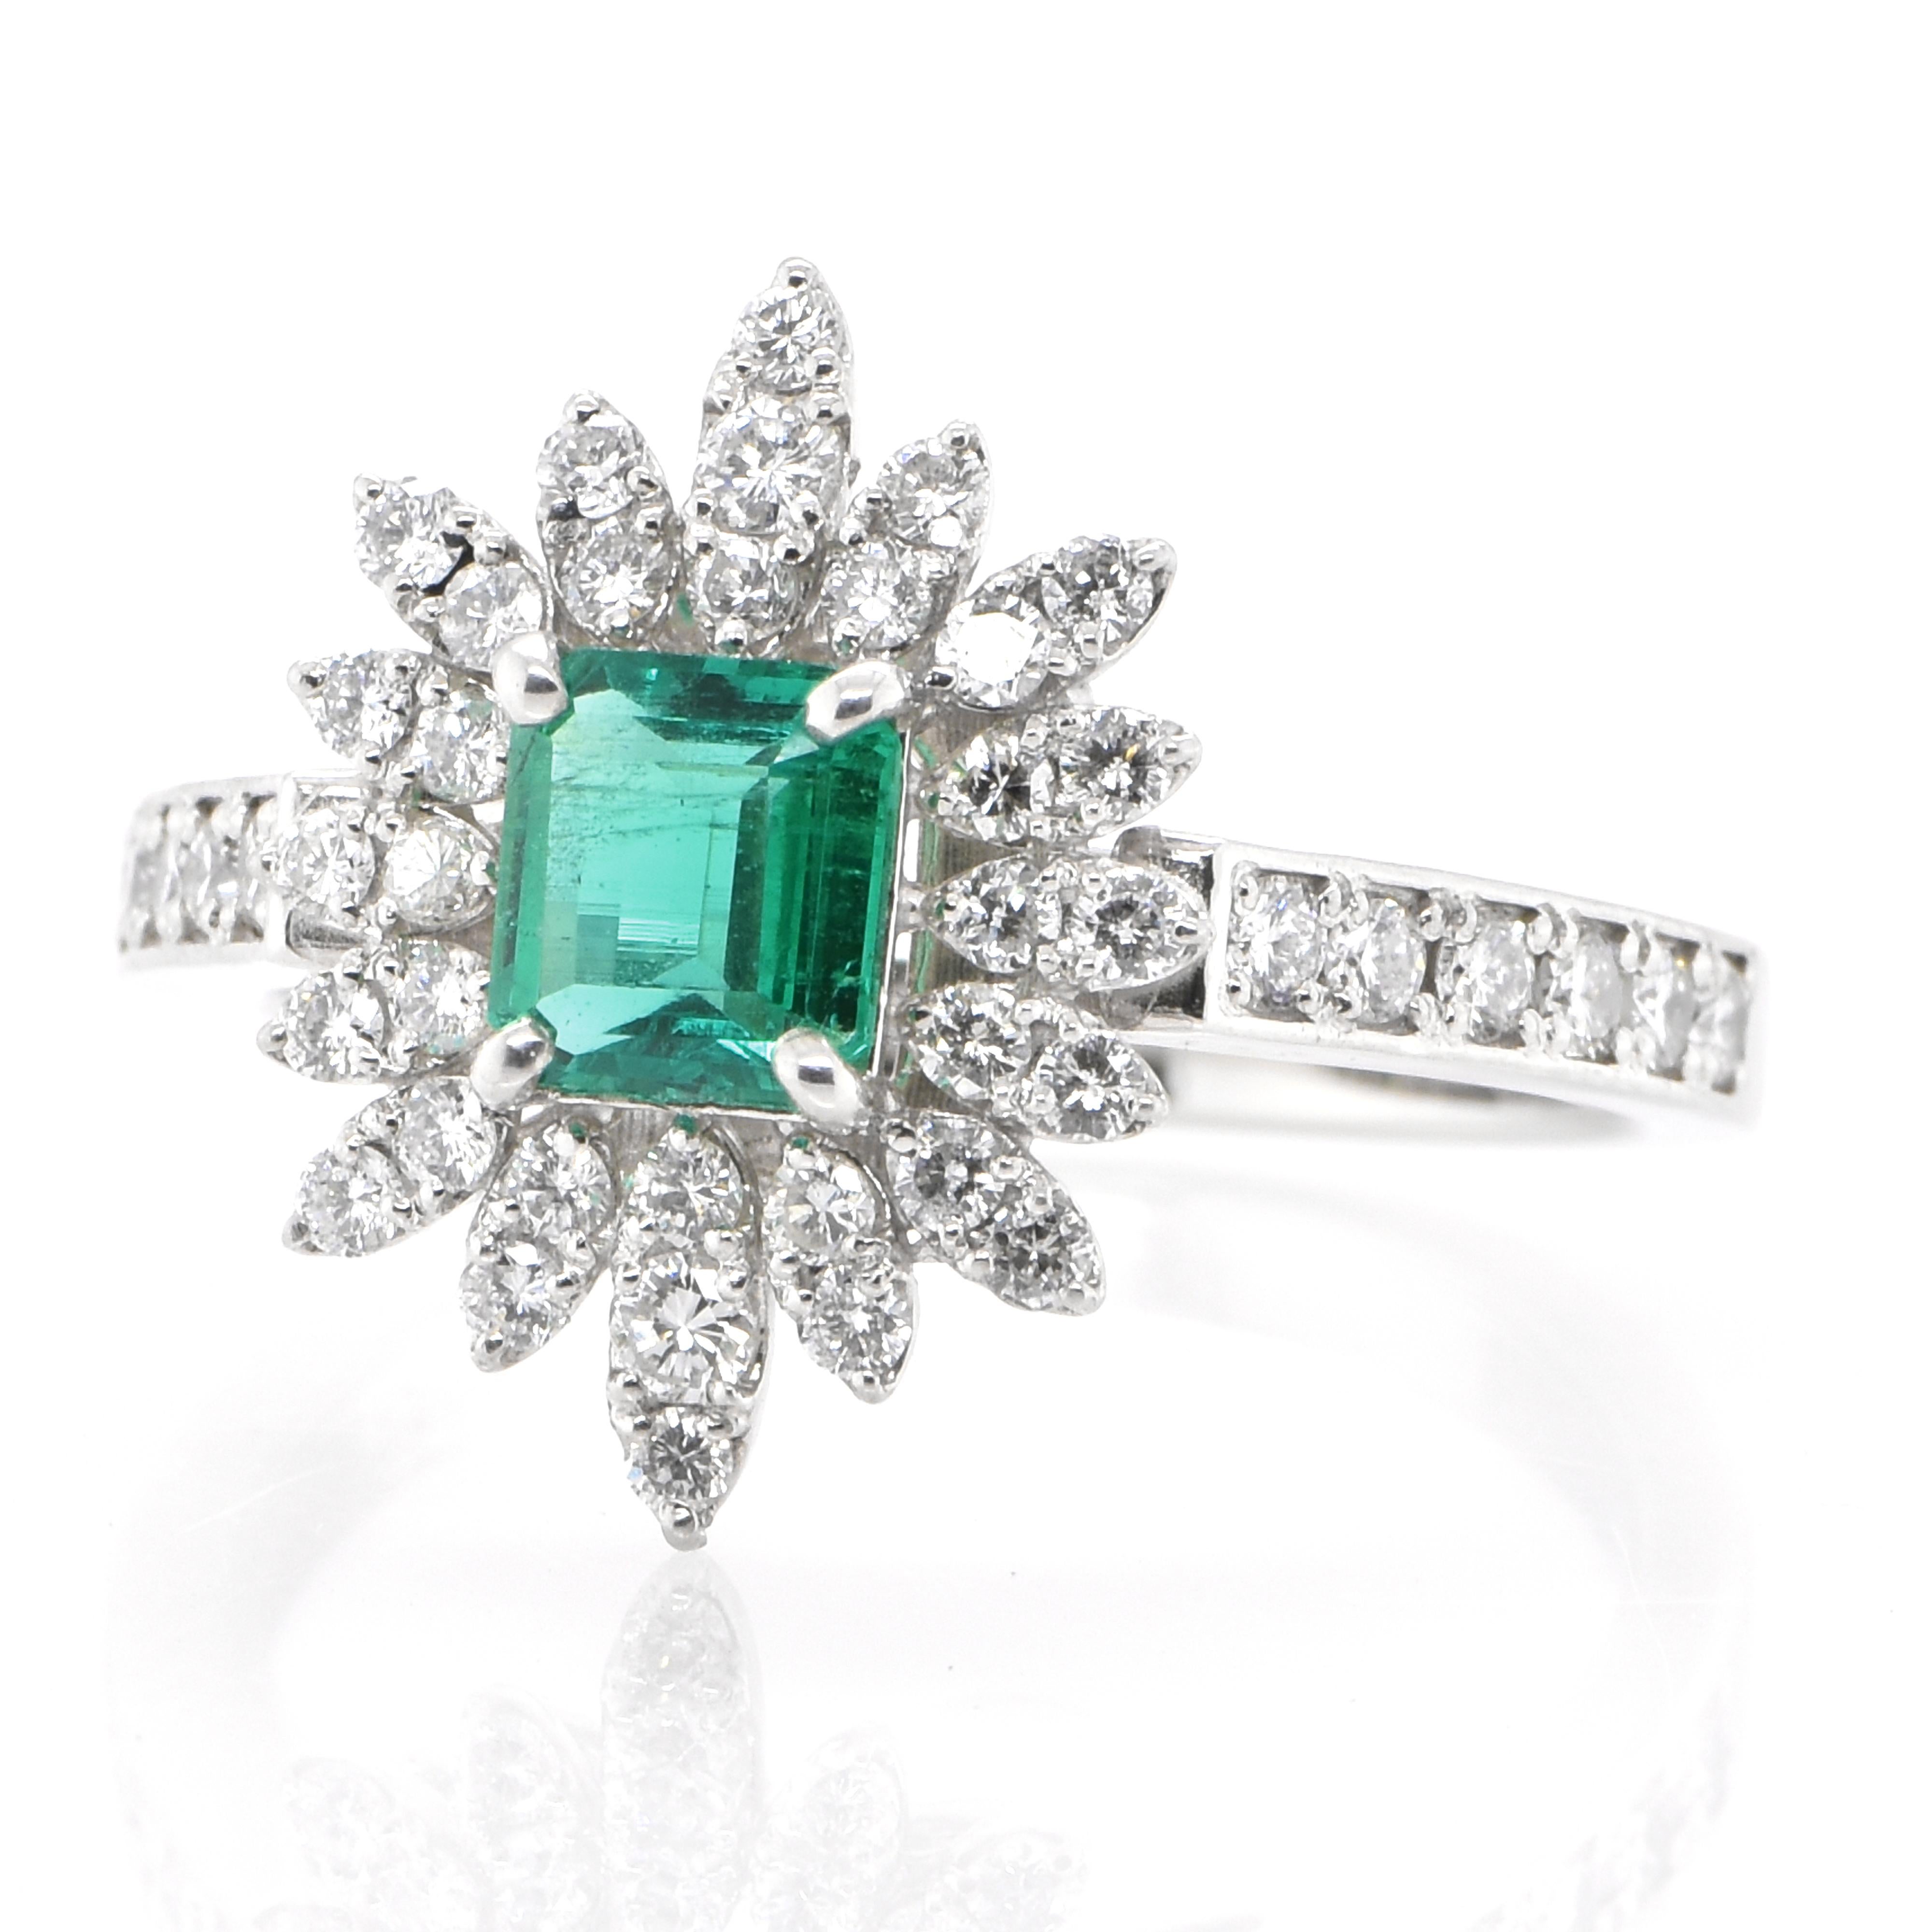 A stunning ring featuring a 0.652 Carat Natural Emerald and 0.61 Carats of Diamond Accents set in Platinum. People have admired emerald’s green for thousands of years. Emeralds have always been associated with the lushest landscapes and the richest